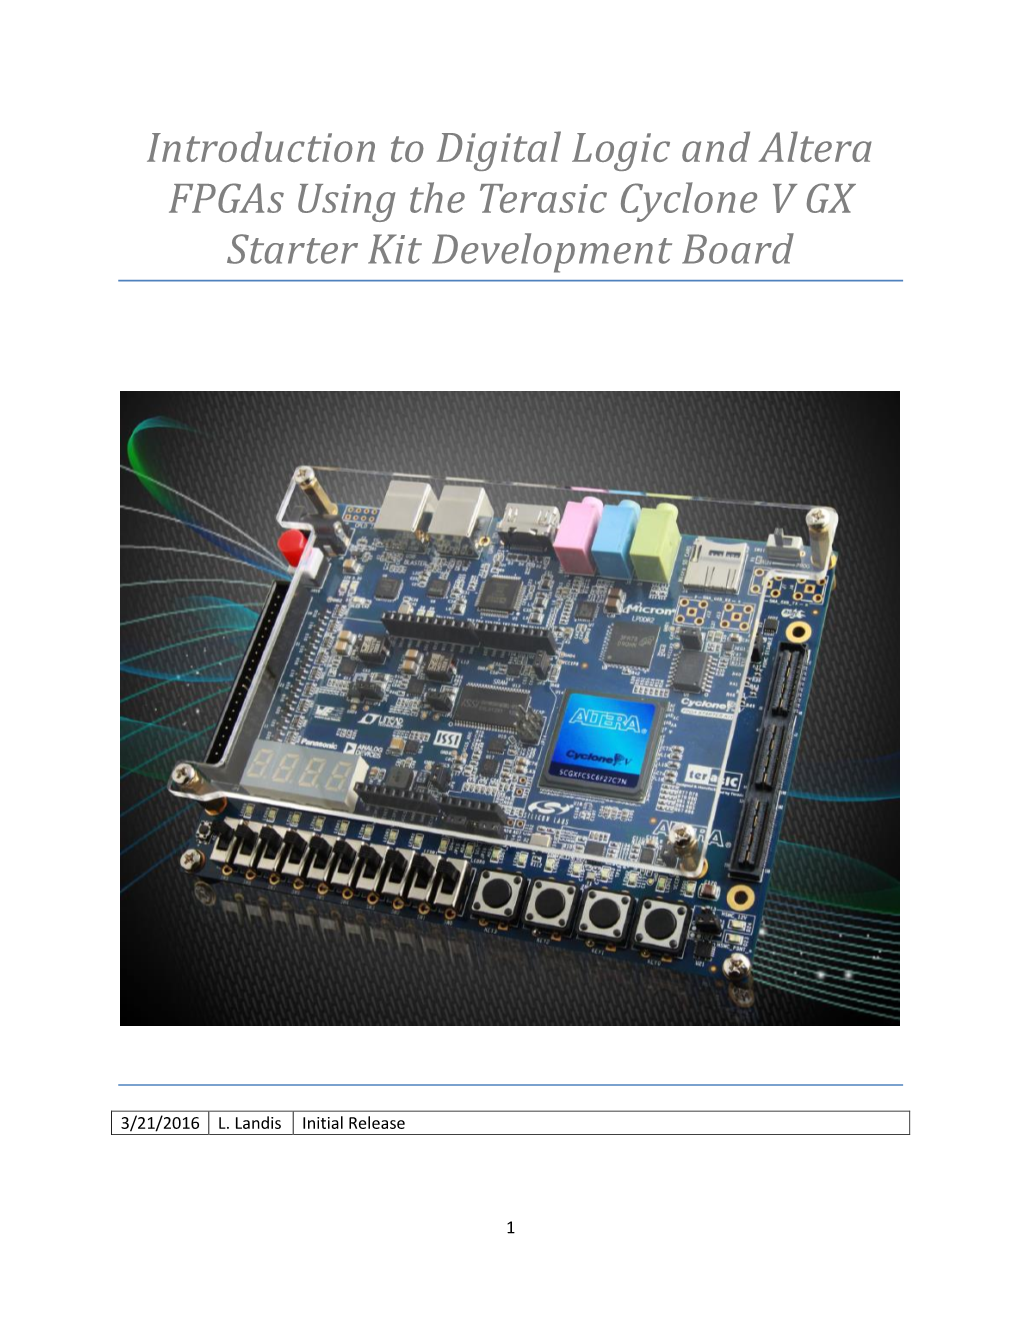 Introduction to Digital Logic and Altera Fpgas Using the Terasic Cyclone V GX Starter Kit Development Board